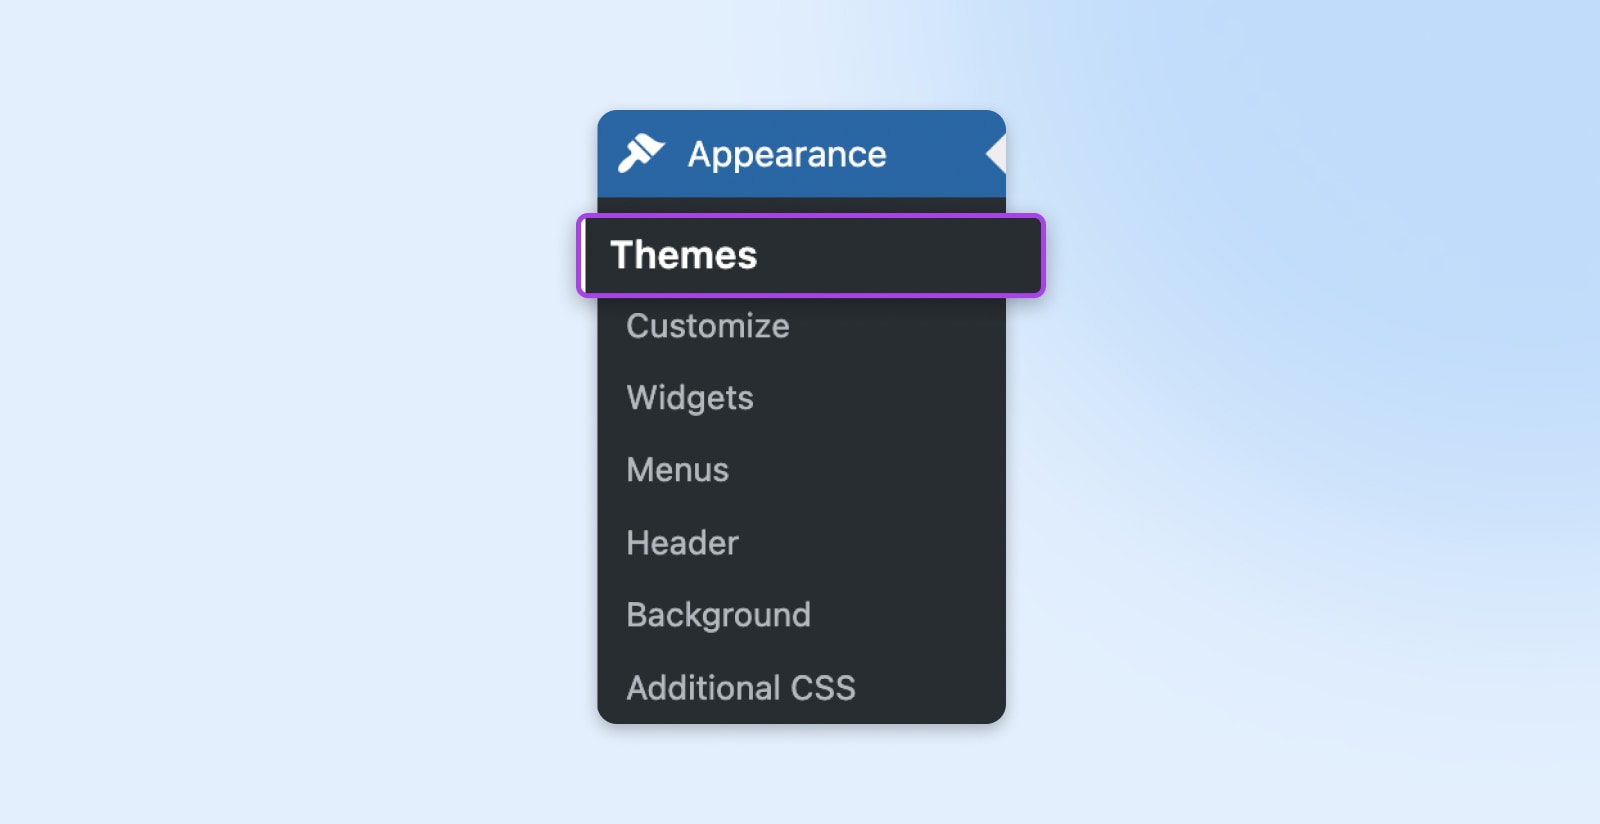 Choose Your Theme